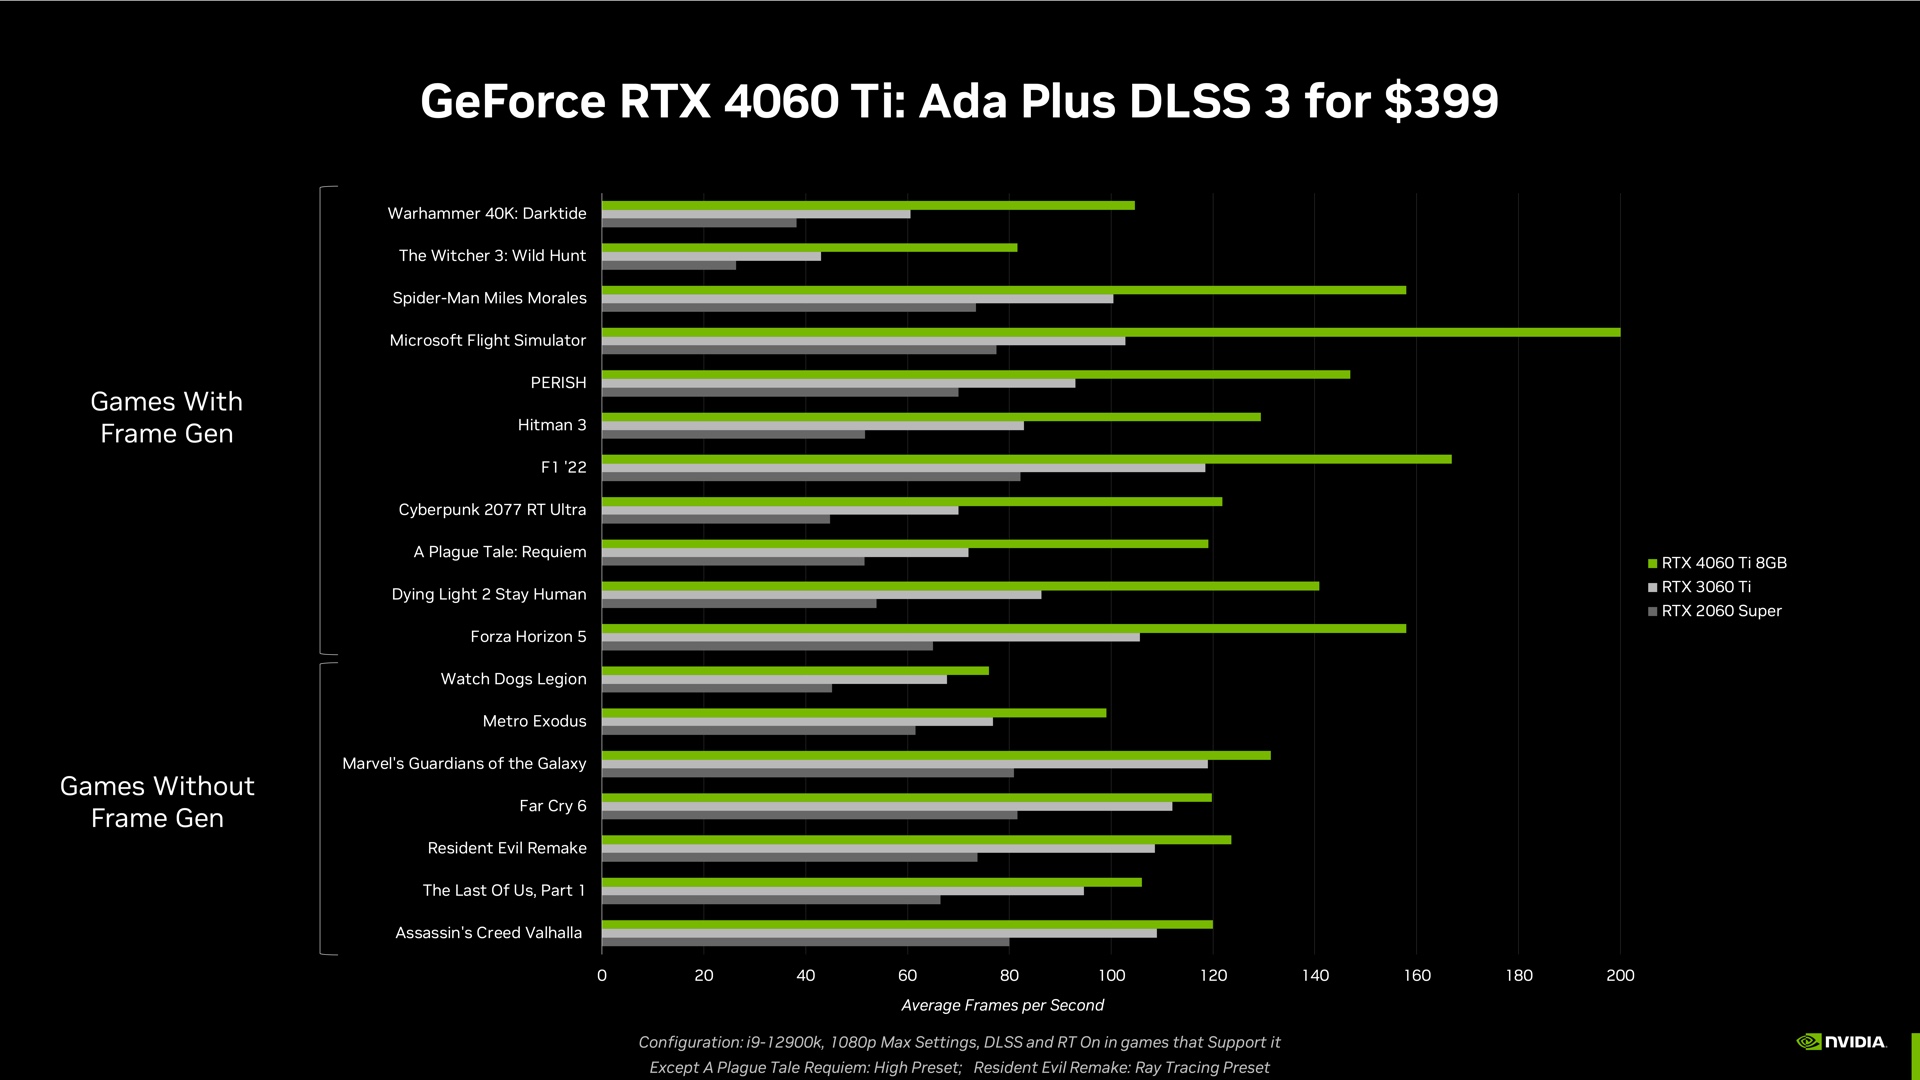 The DLSS FG games in Nvidia's test suite show a larger improvement than the games that don't support it. 